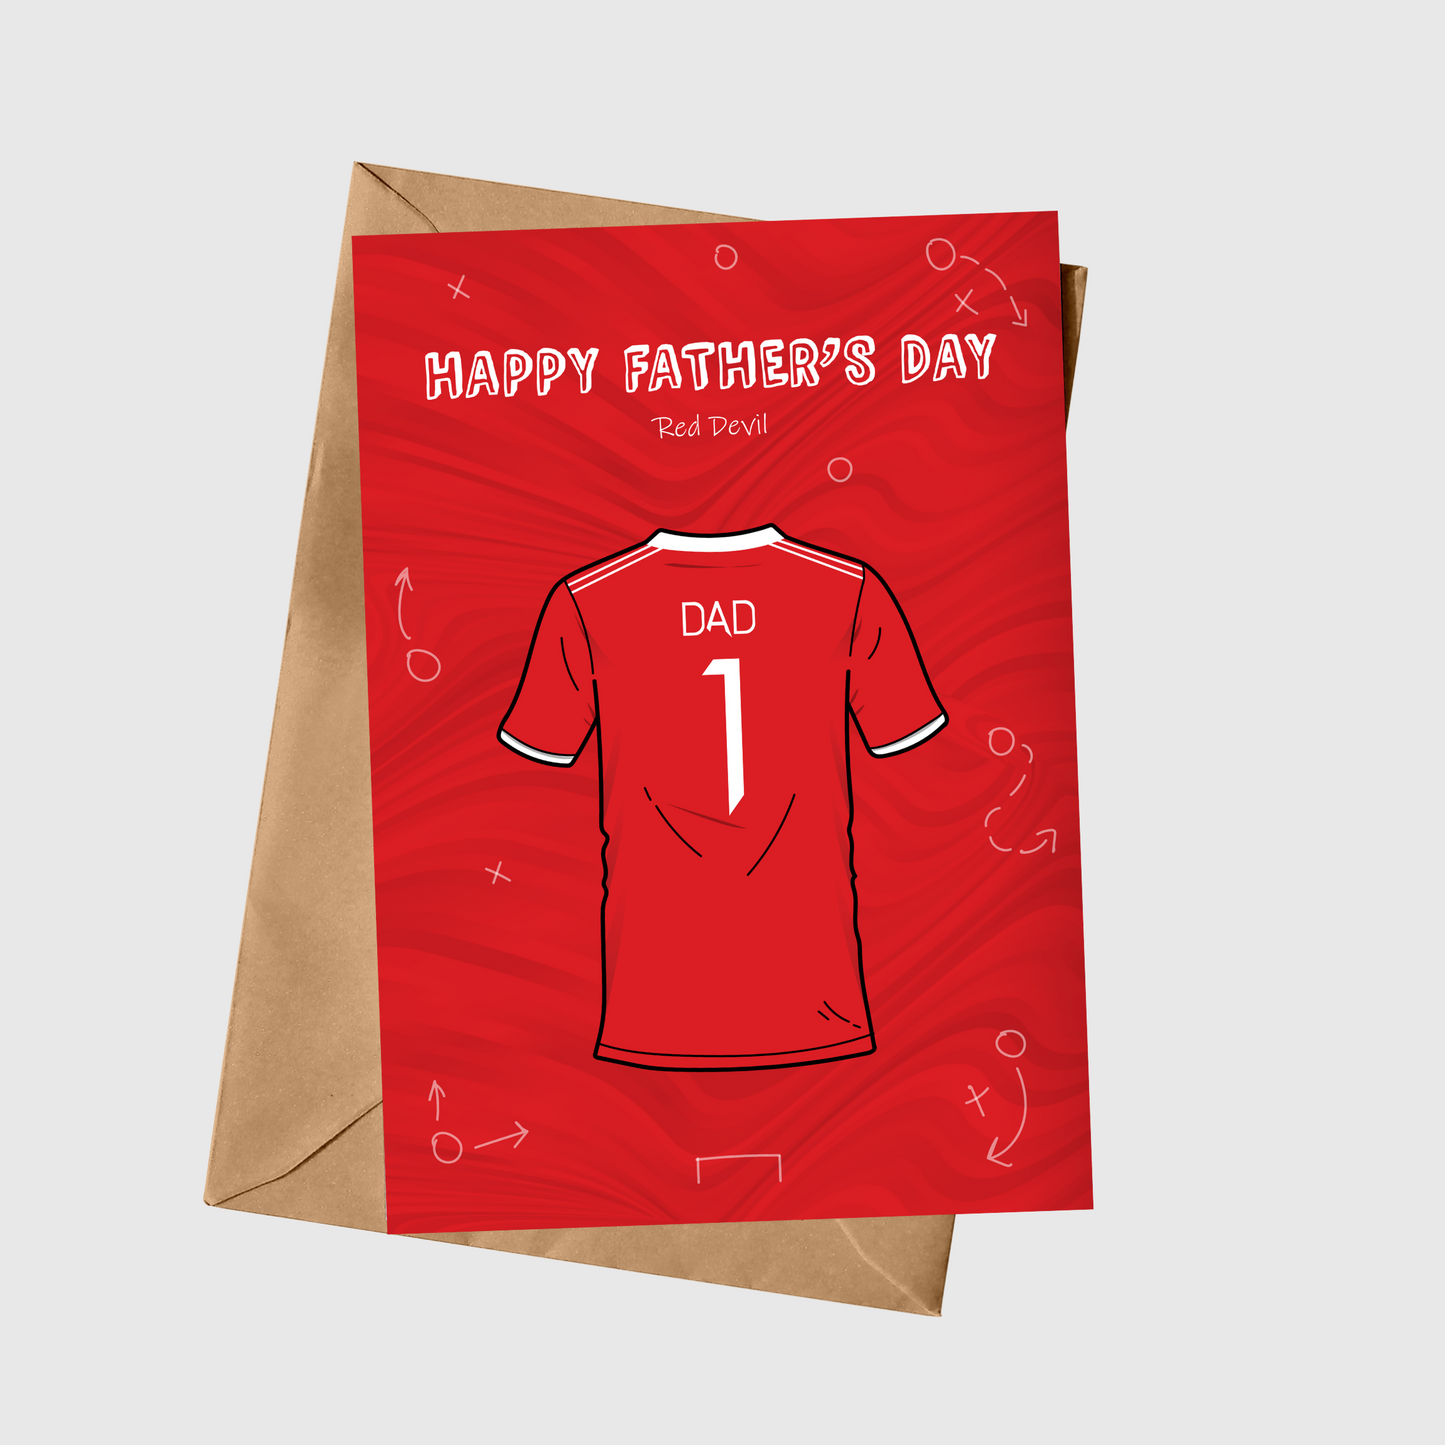 Happy Father's Day - Red Devil